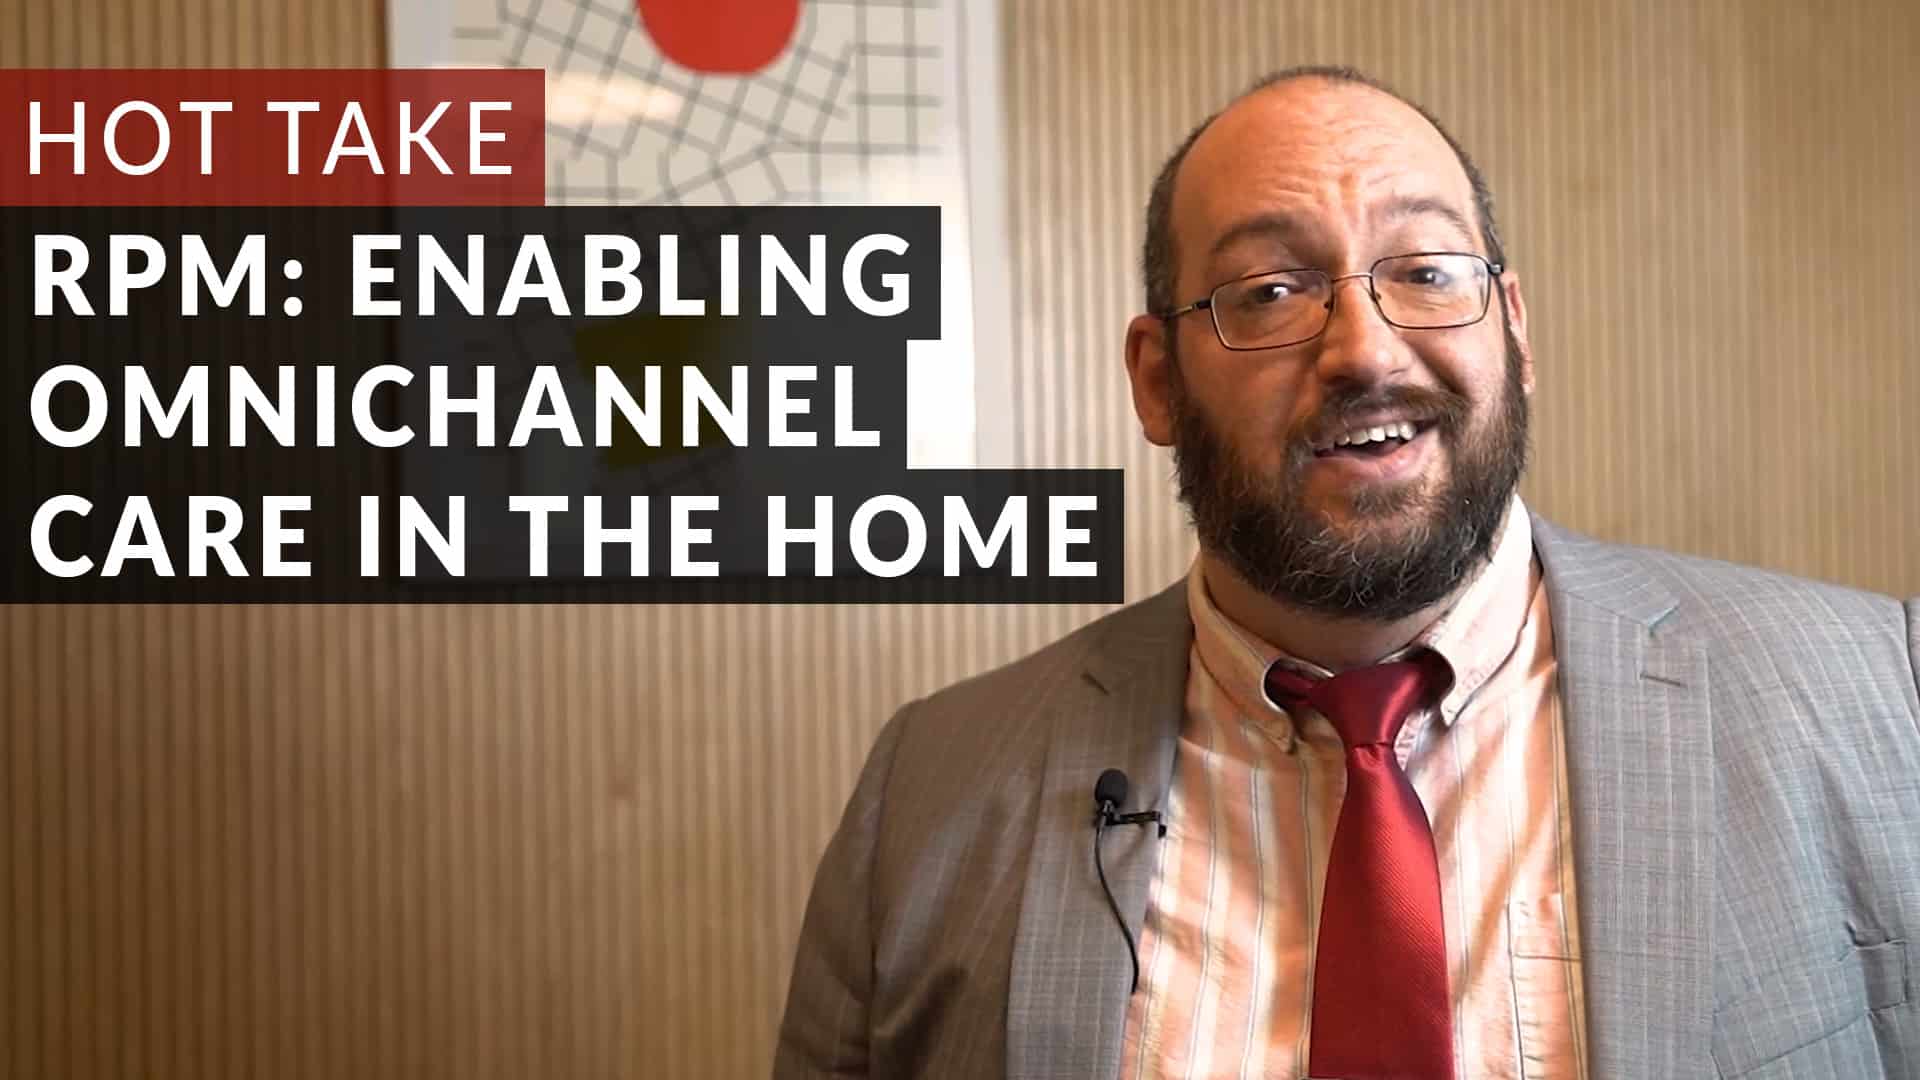 Hot Take | Remote Patient Monitoring: Enabling Omnichannel Care in the Home